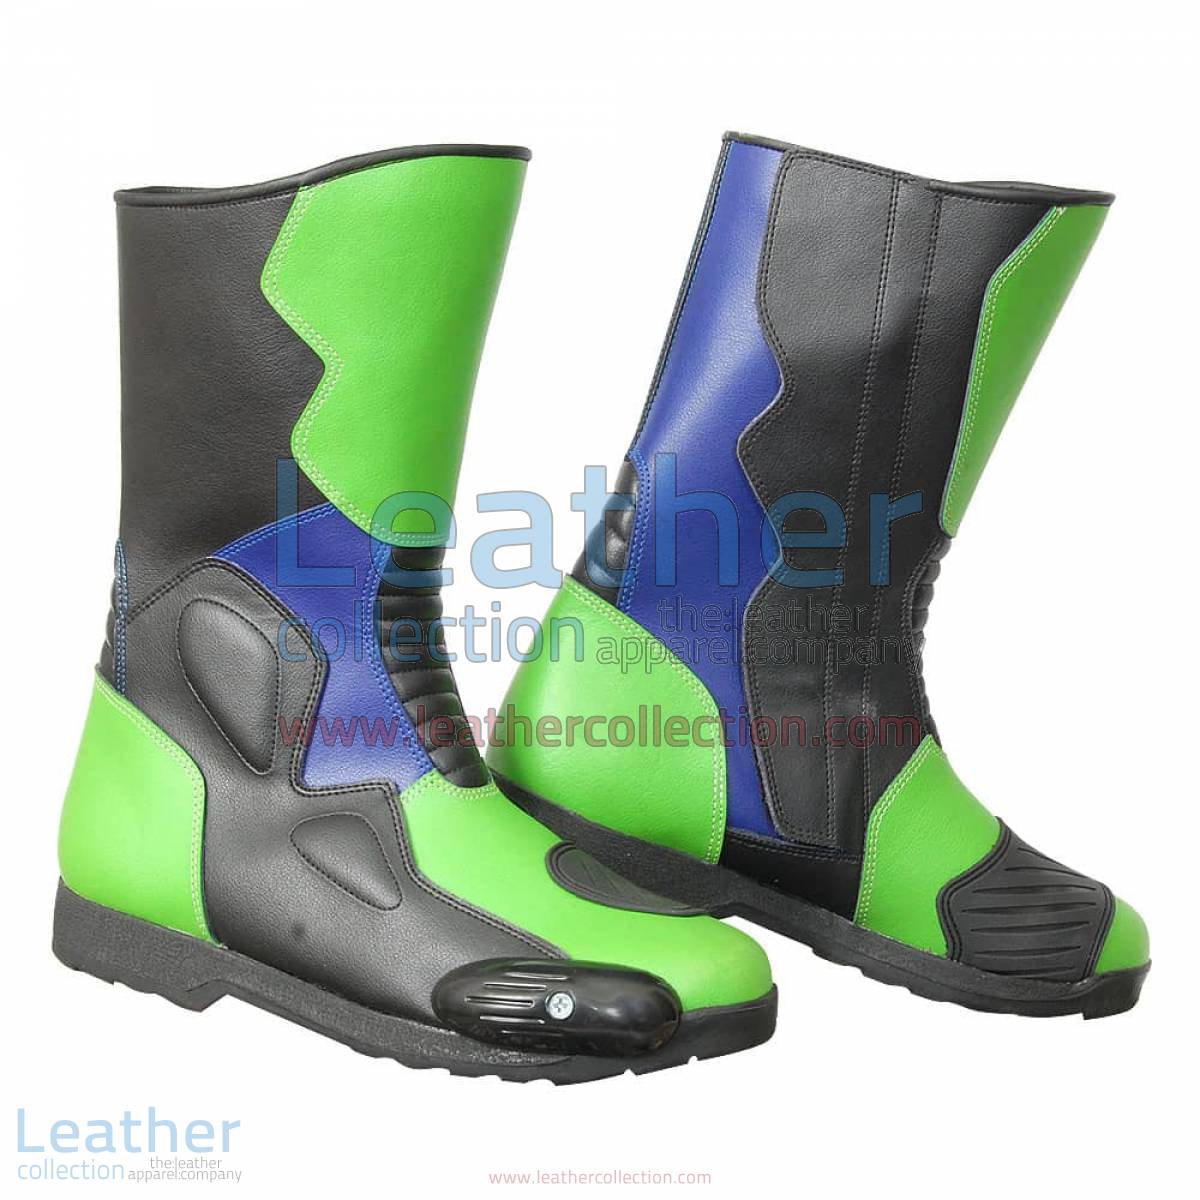 Speed Riding Boots